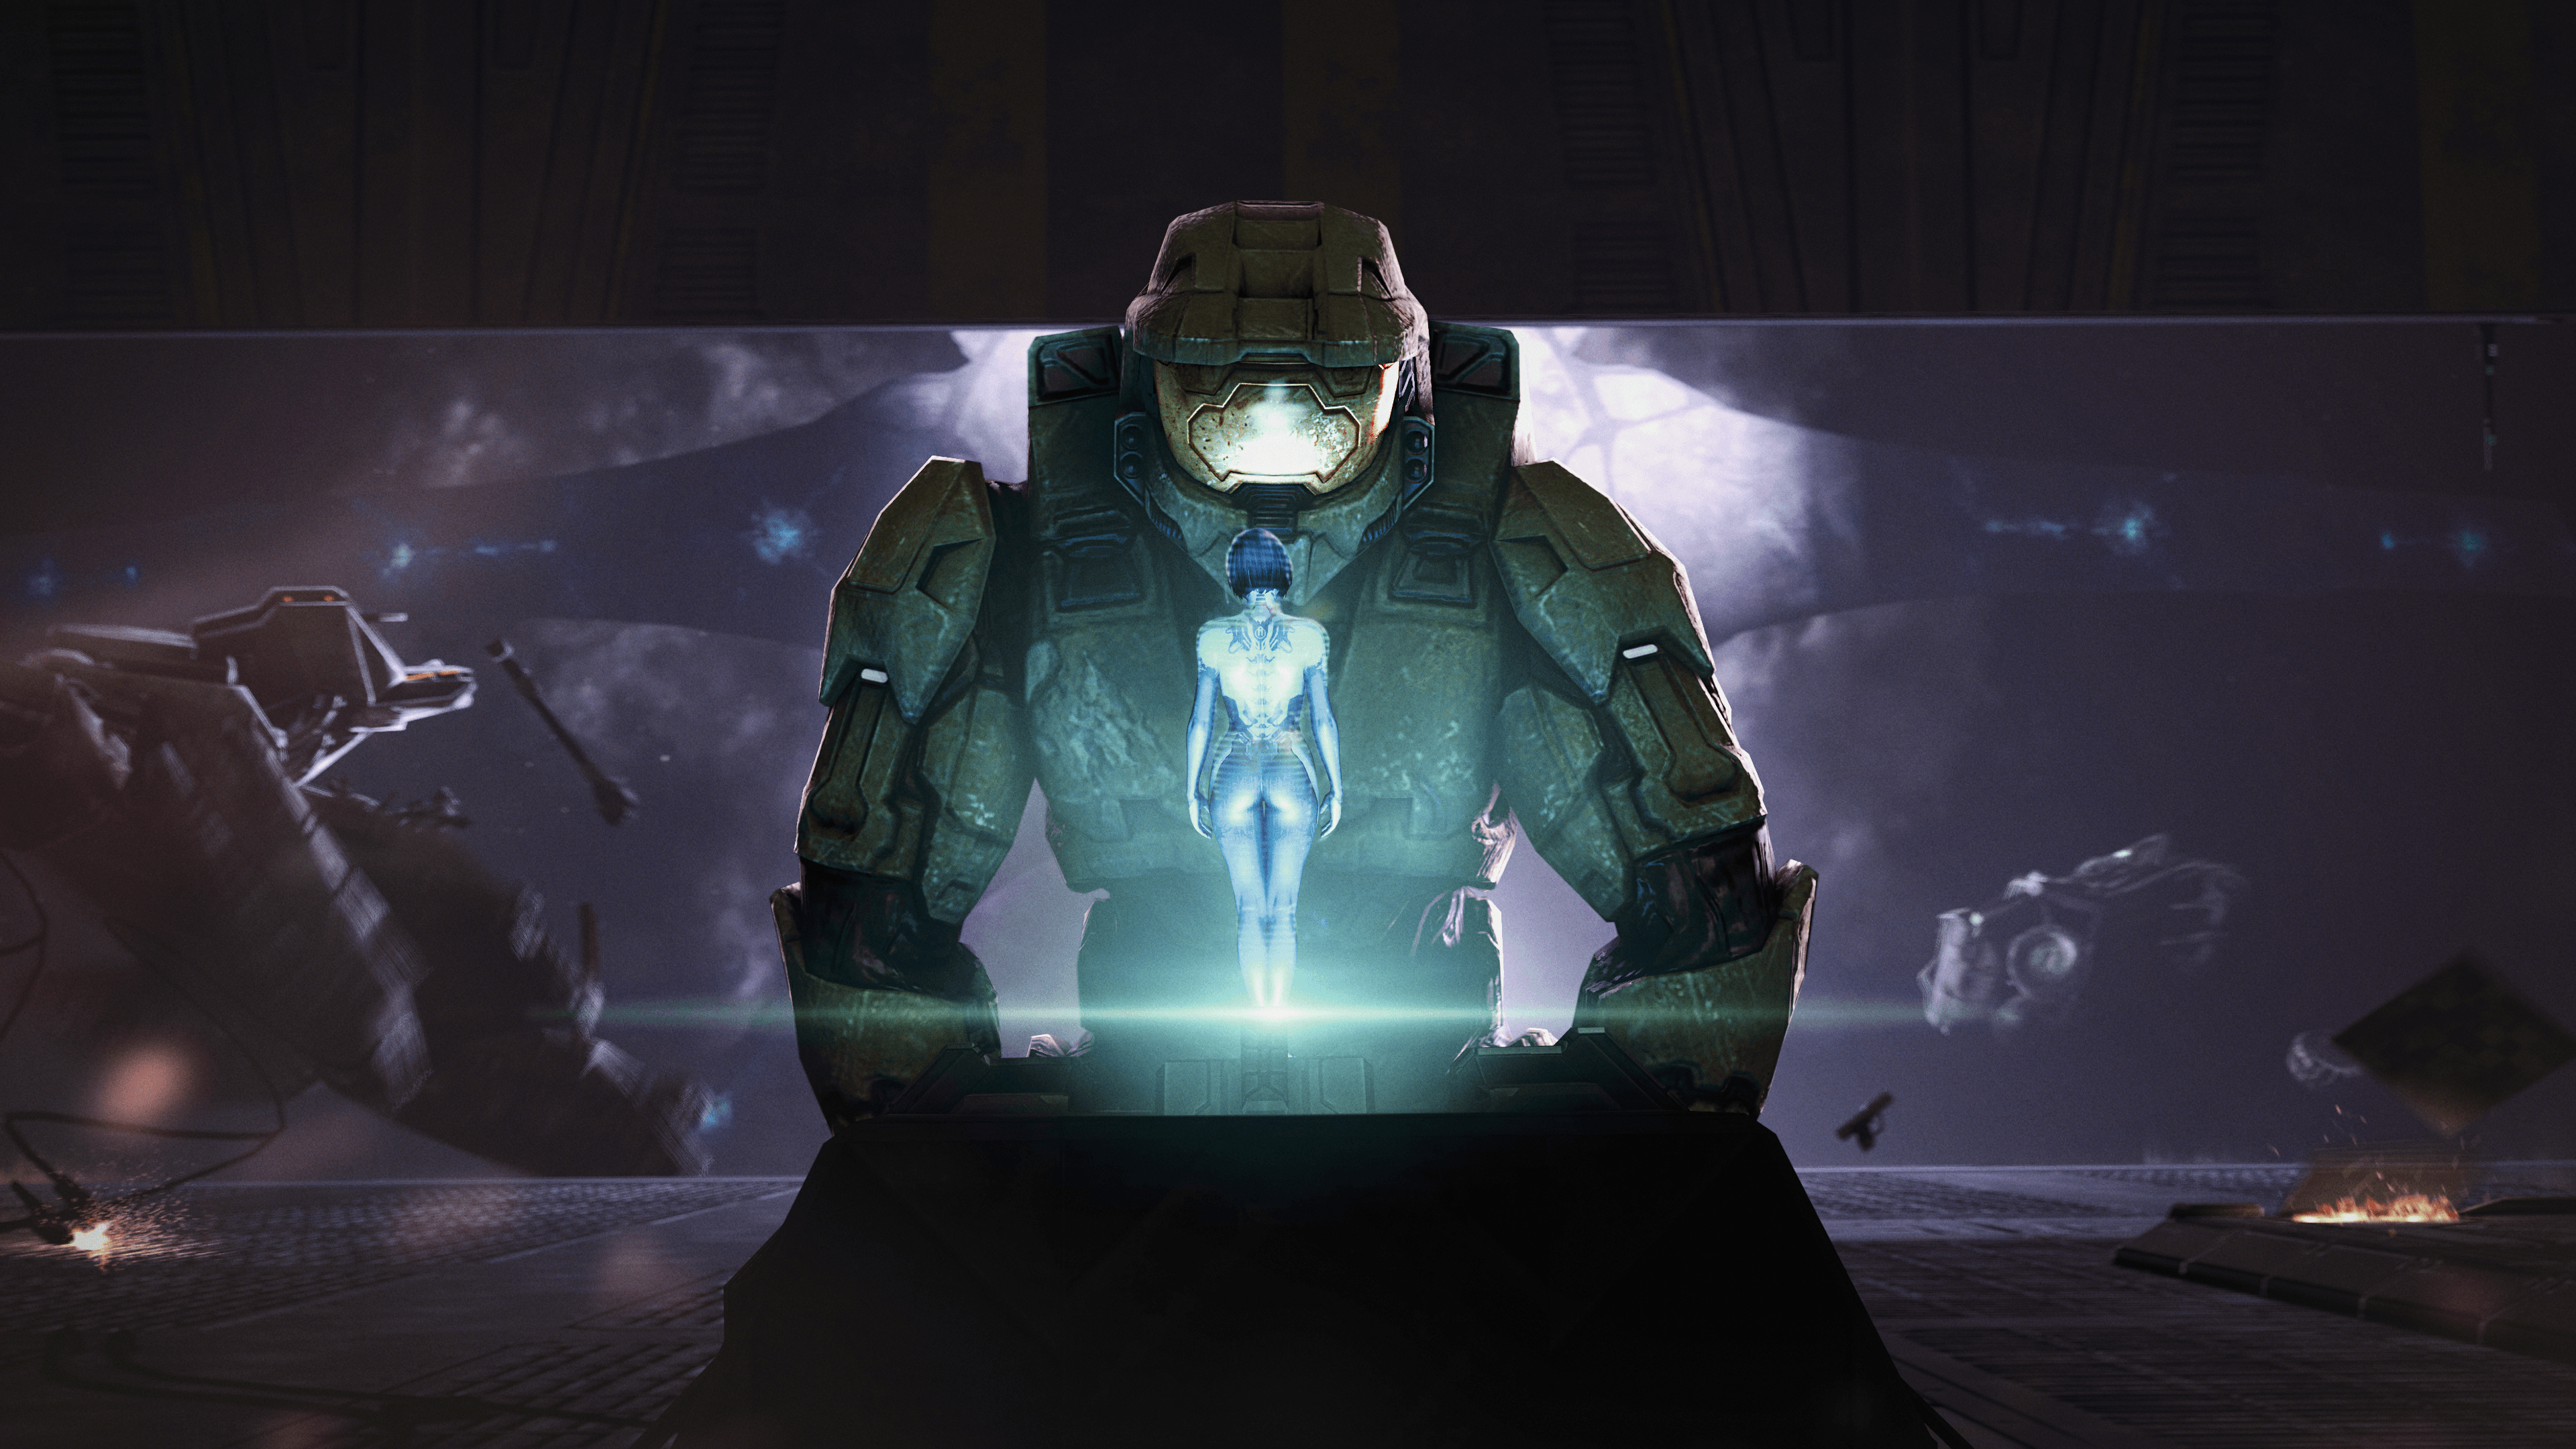 Halo 3: ODST, Gaming experience, Action-packed storyline, Futuristic atmosphere, 3840x2160 4K Desktop